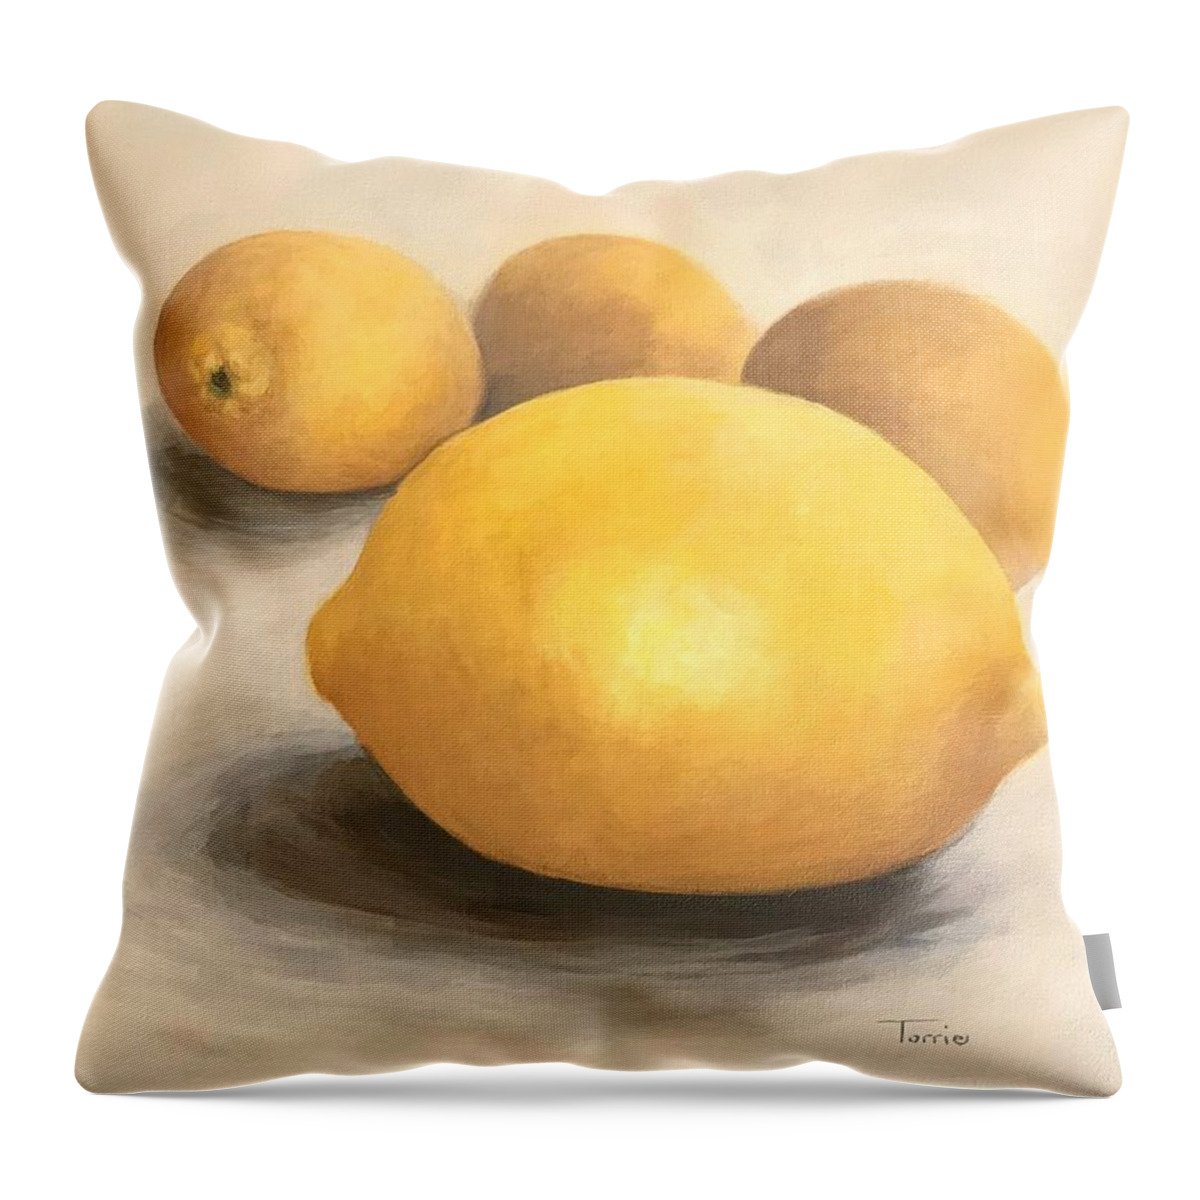 Lemon Throw Pillow featuring the painting Five Lemons by Torrie Smiley